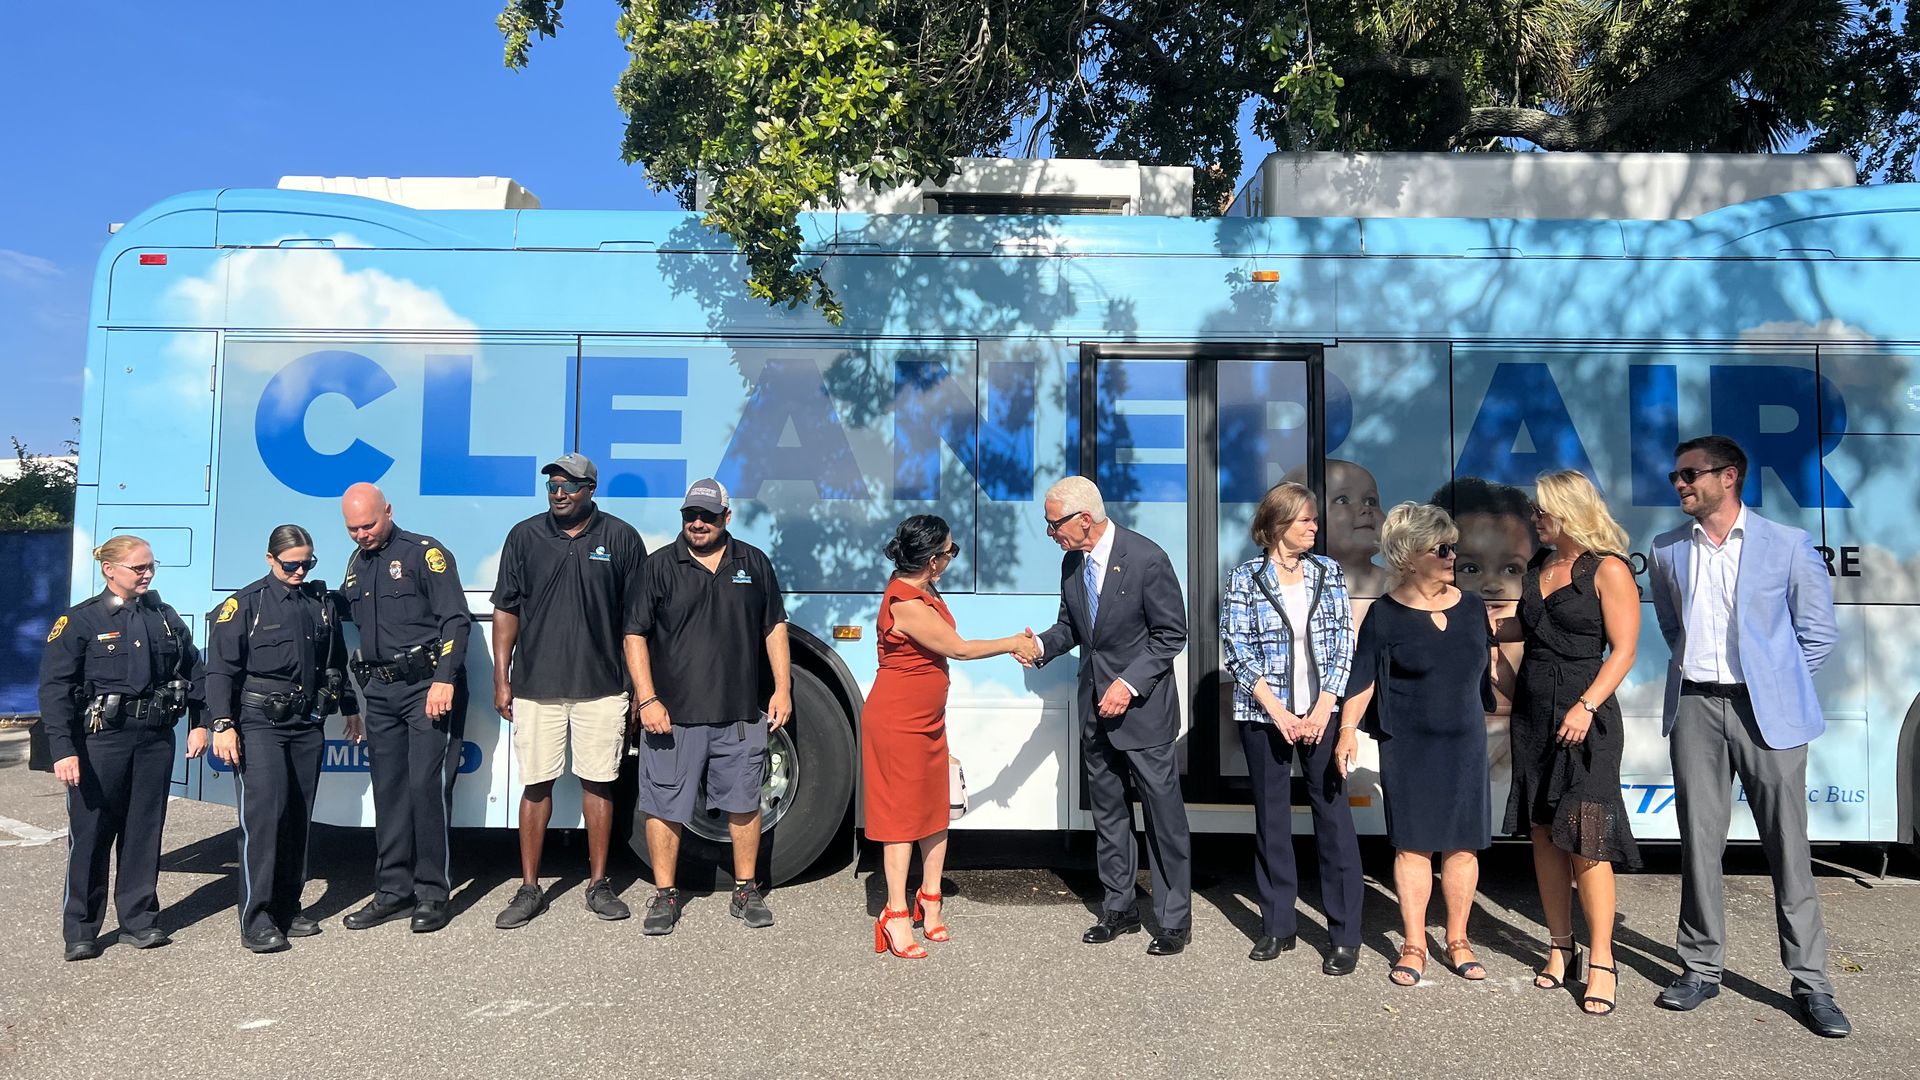 Crust shakes hands with constituents in front of the electric bus